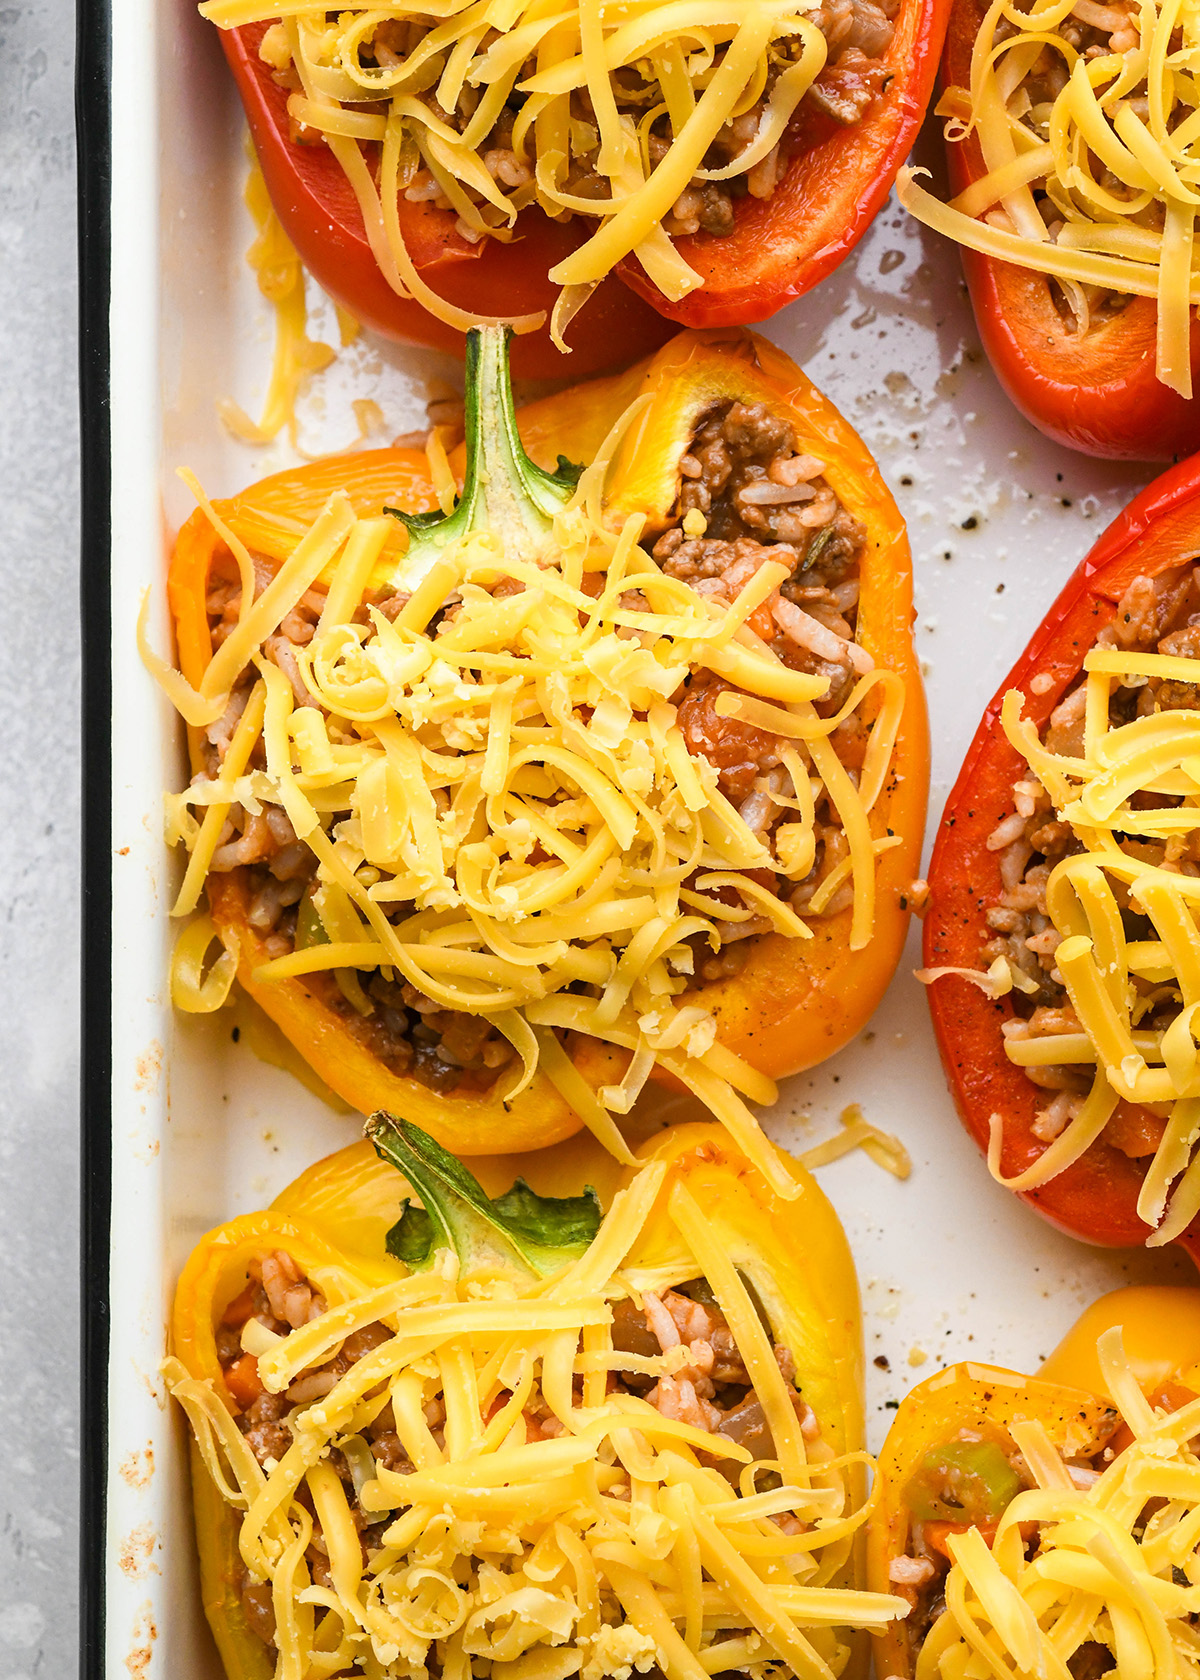 stuffed peppers on a baking sheet topped with cheese before baking